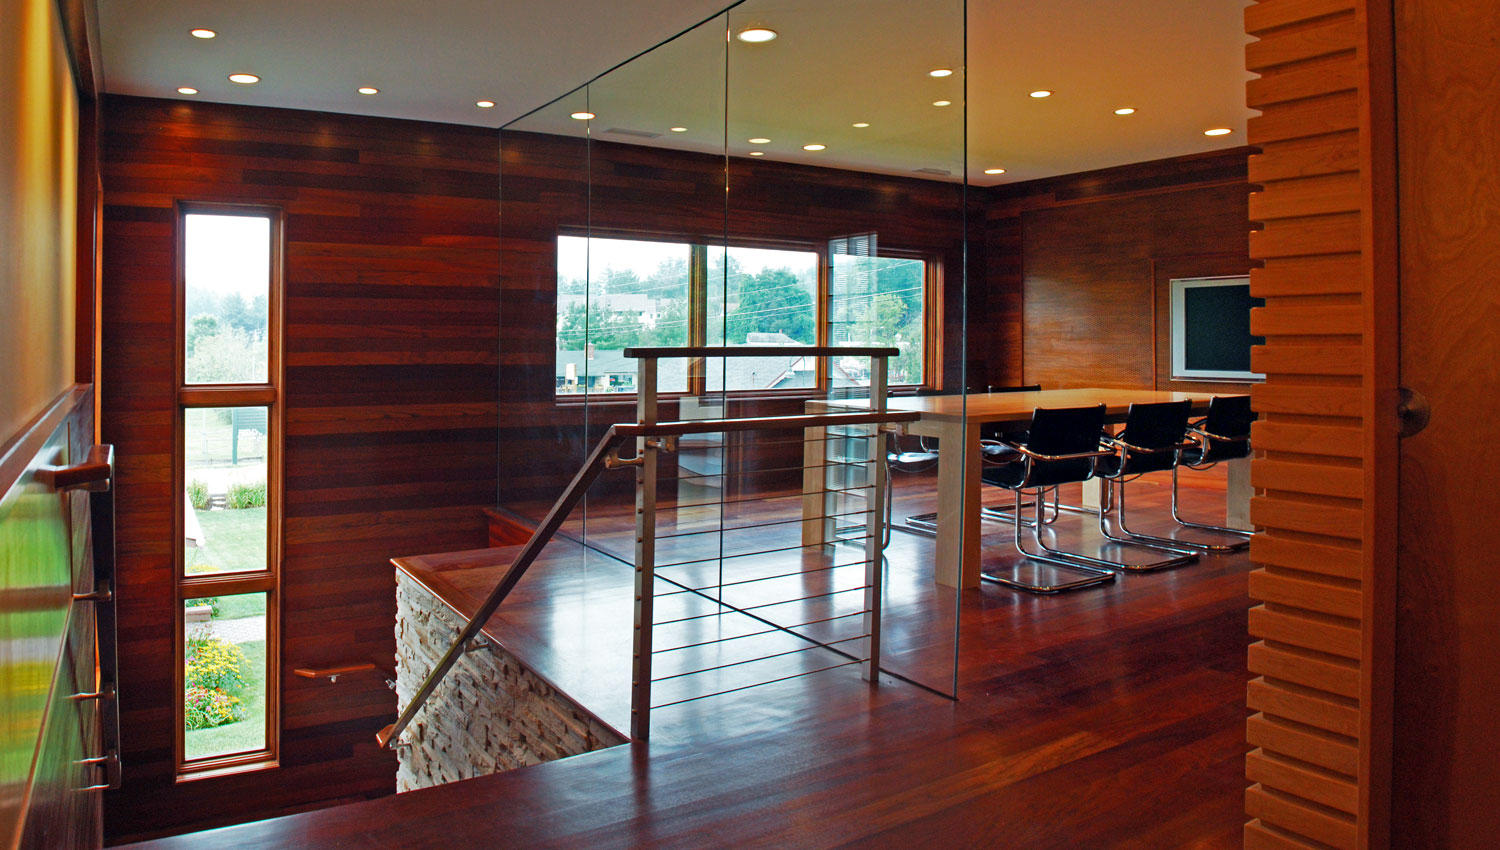 Pavelchak Architecture's conference room showcasing modern, clean design aesthetic with beautiful brazillian cherry and maple hardwoods set against a stunning glass wall.   Located in downtown Banner Elk, North Carolina near Boone. Custom conference table by Miter's Touch.Custom conference table by Miter's Touch.